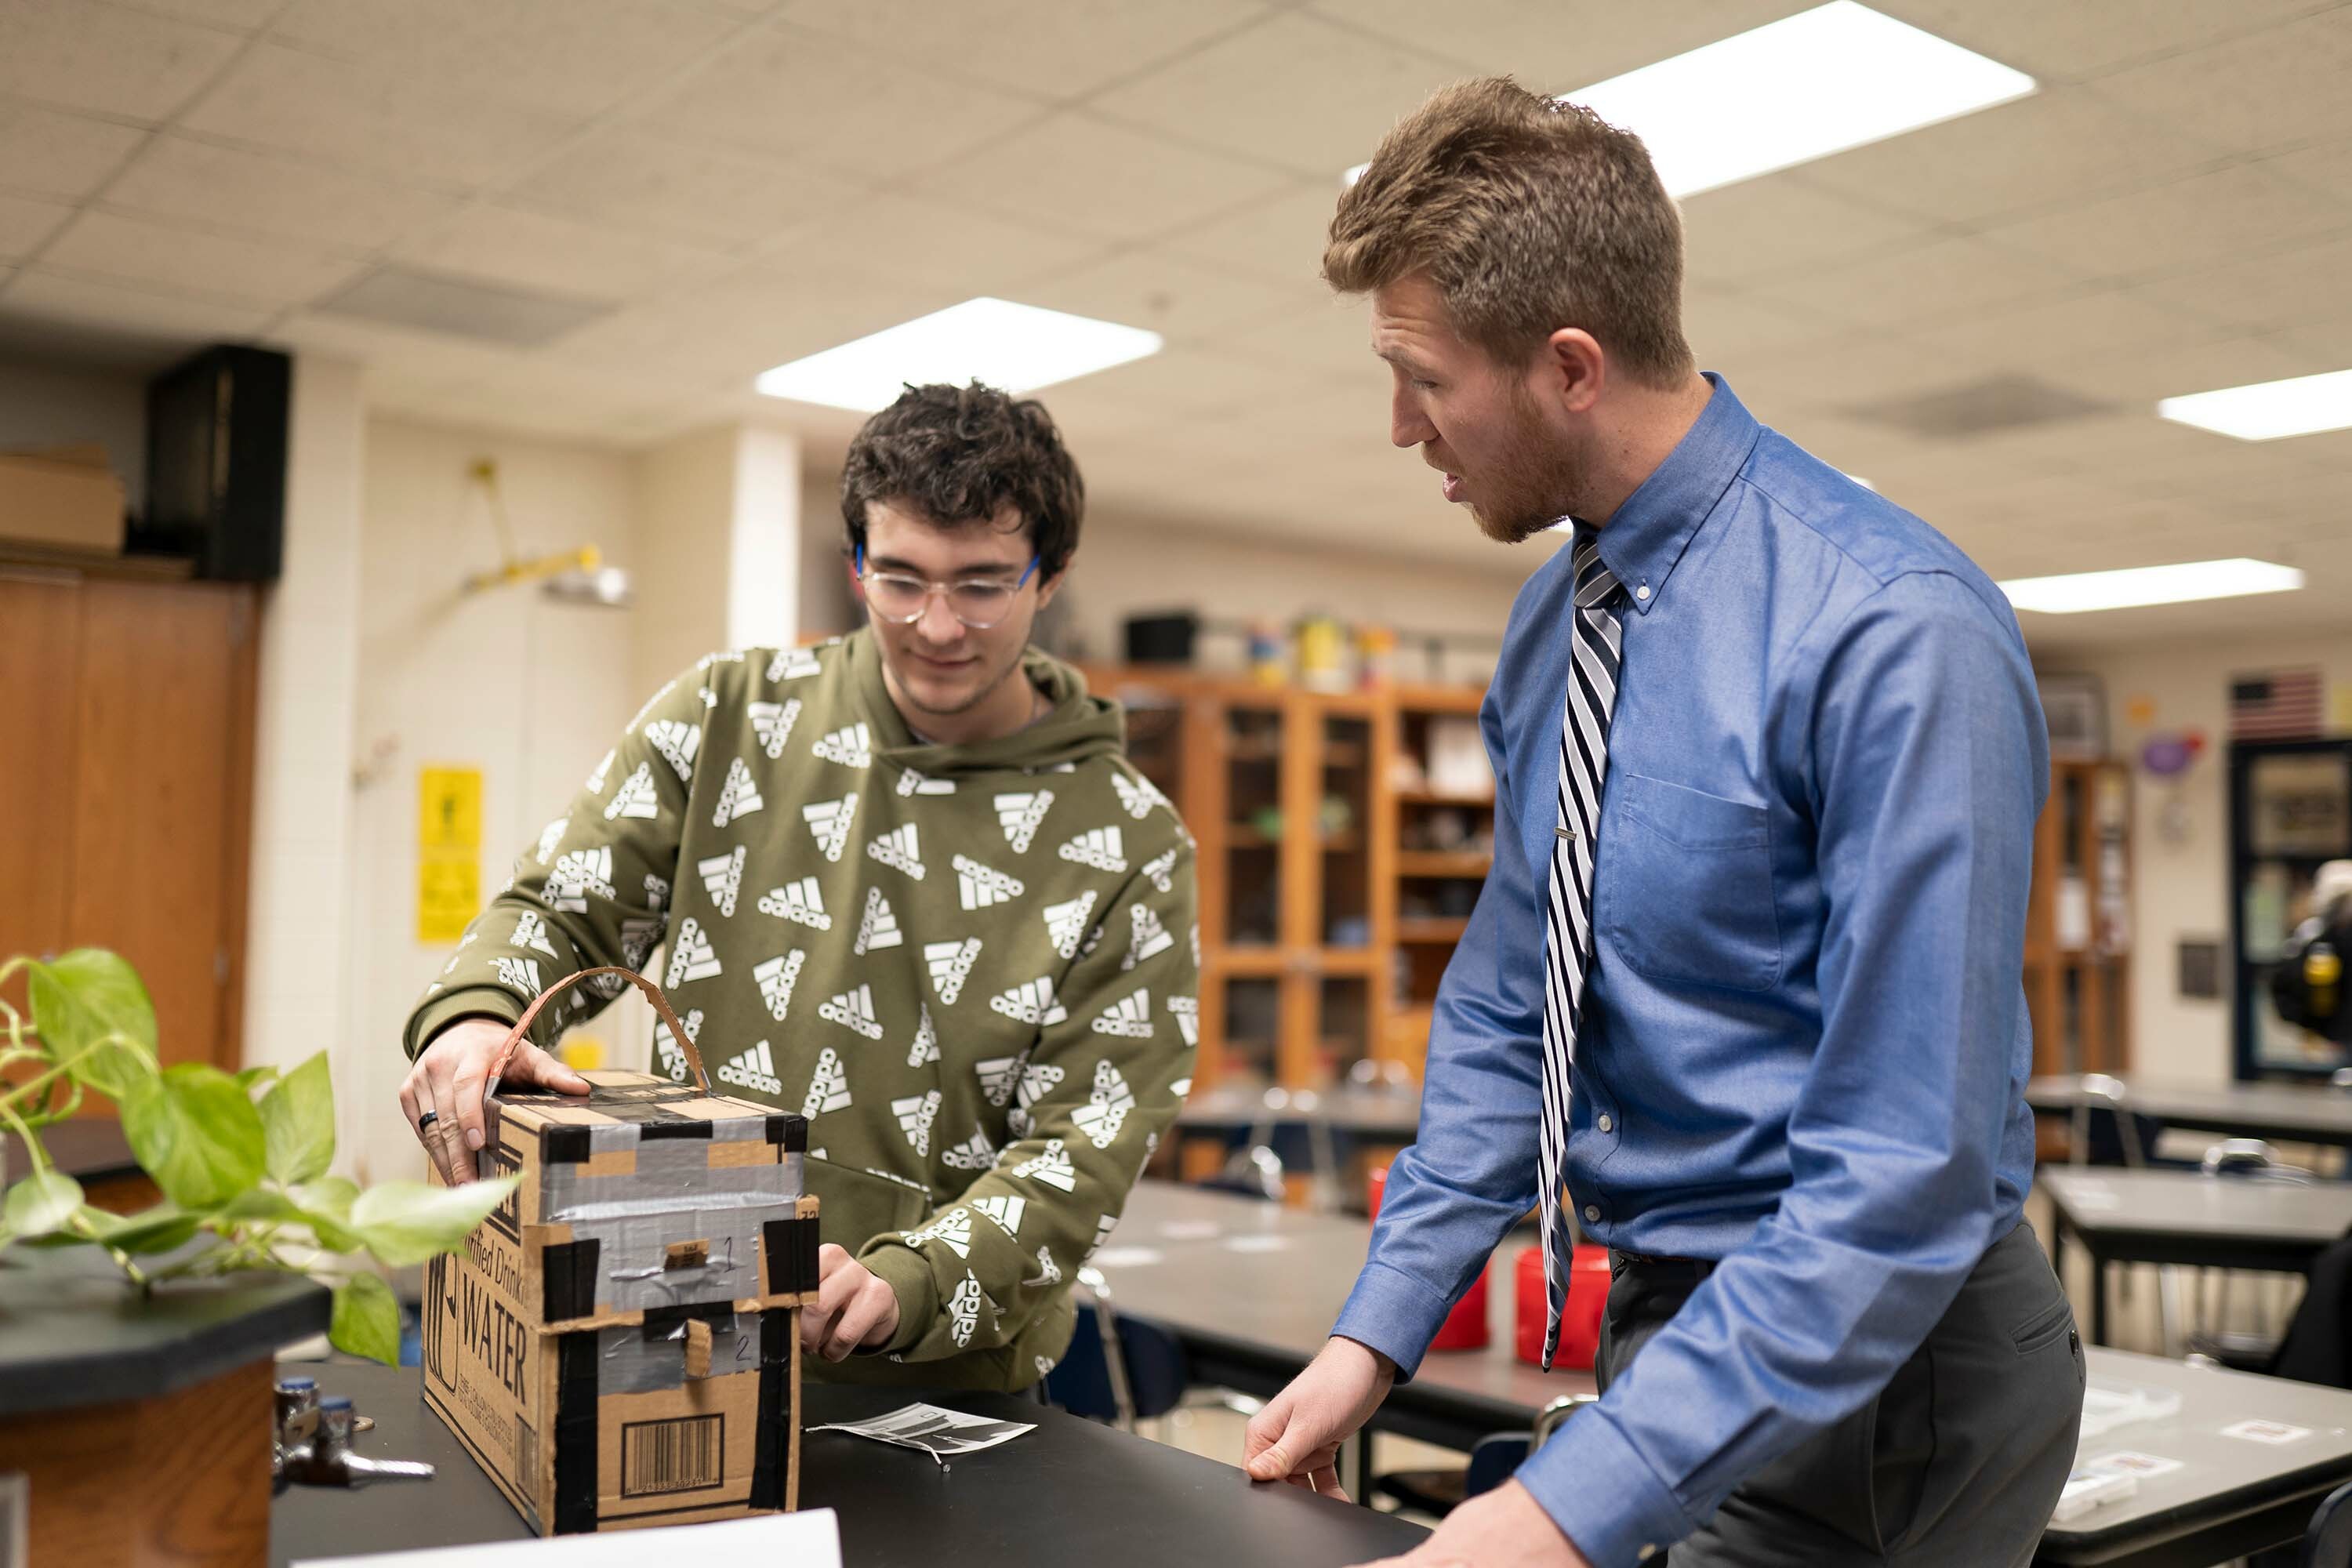 A male student teacher in the Professional Development School program works with a high school student in the classroom on a STEM project